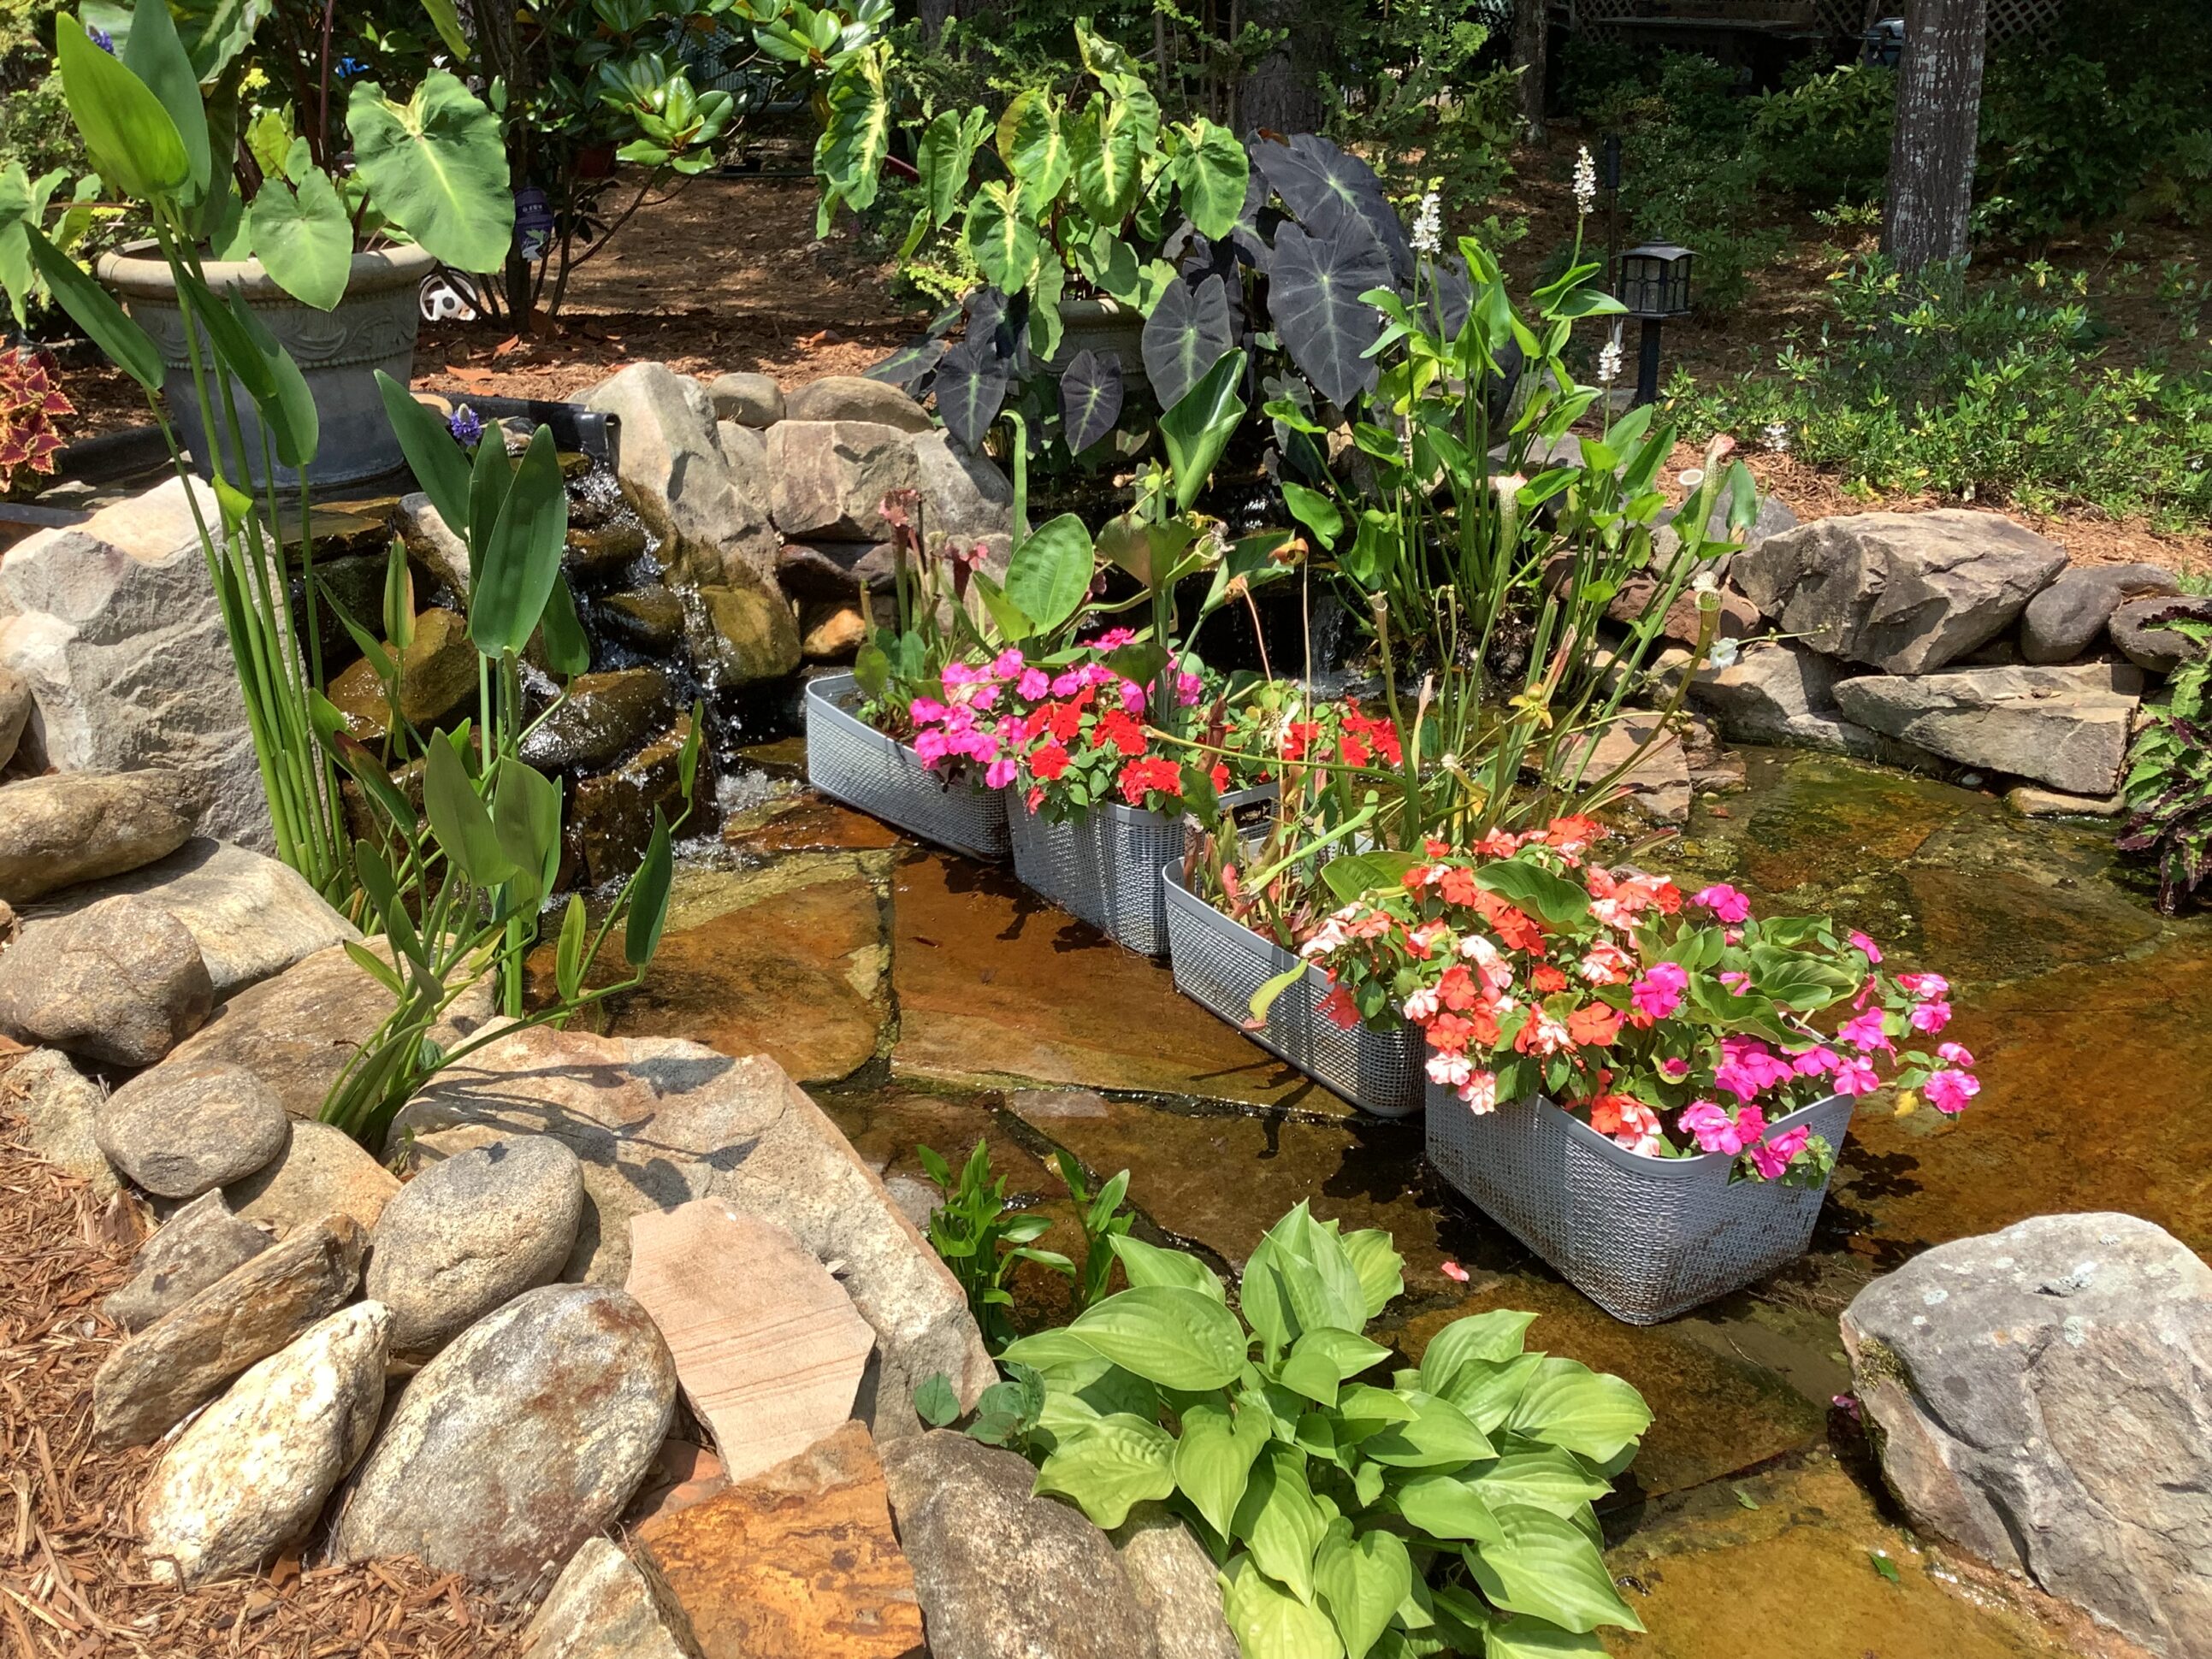 A garden with many plants and rocks in the water.